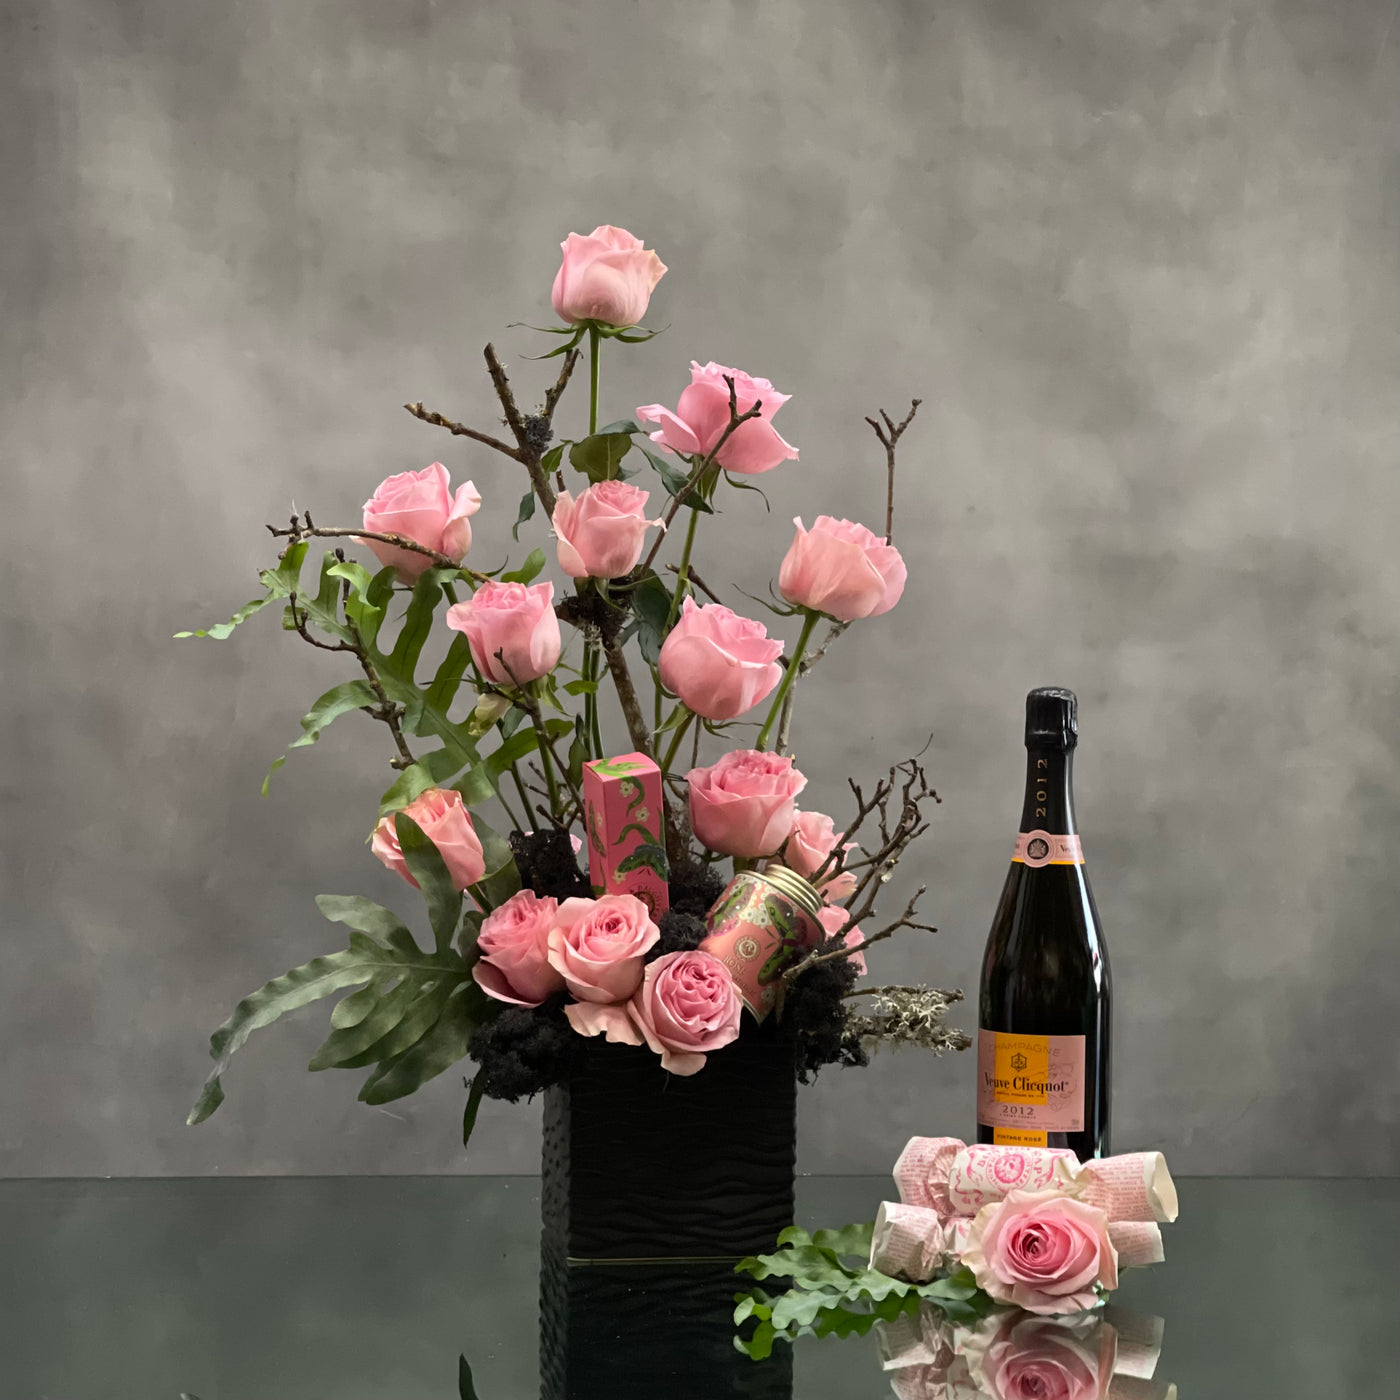 Beverly Hills Florist presents 2 dozen pink roses accented with greenery and branch in a black ceramic vase for same day delivery. Our product includes, Veuve Clicquot, bath salts, hand lotion and bath soap. A thoughtful love and romance gift, thank you gift and perfect for a nice celebration ! 